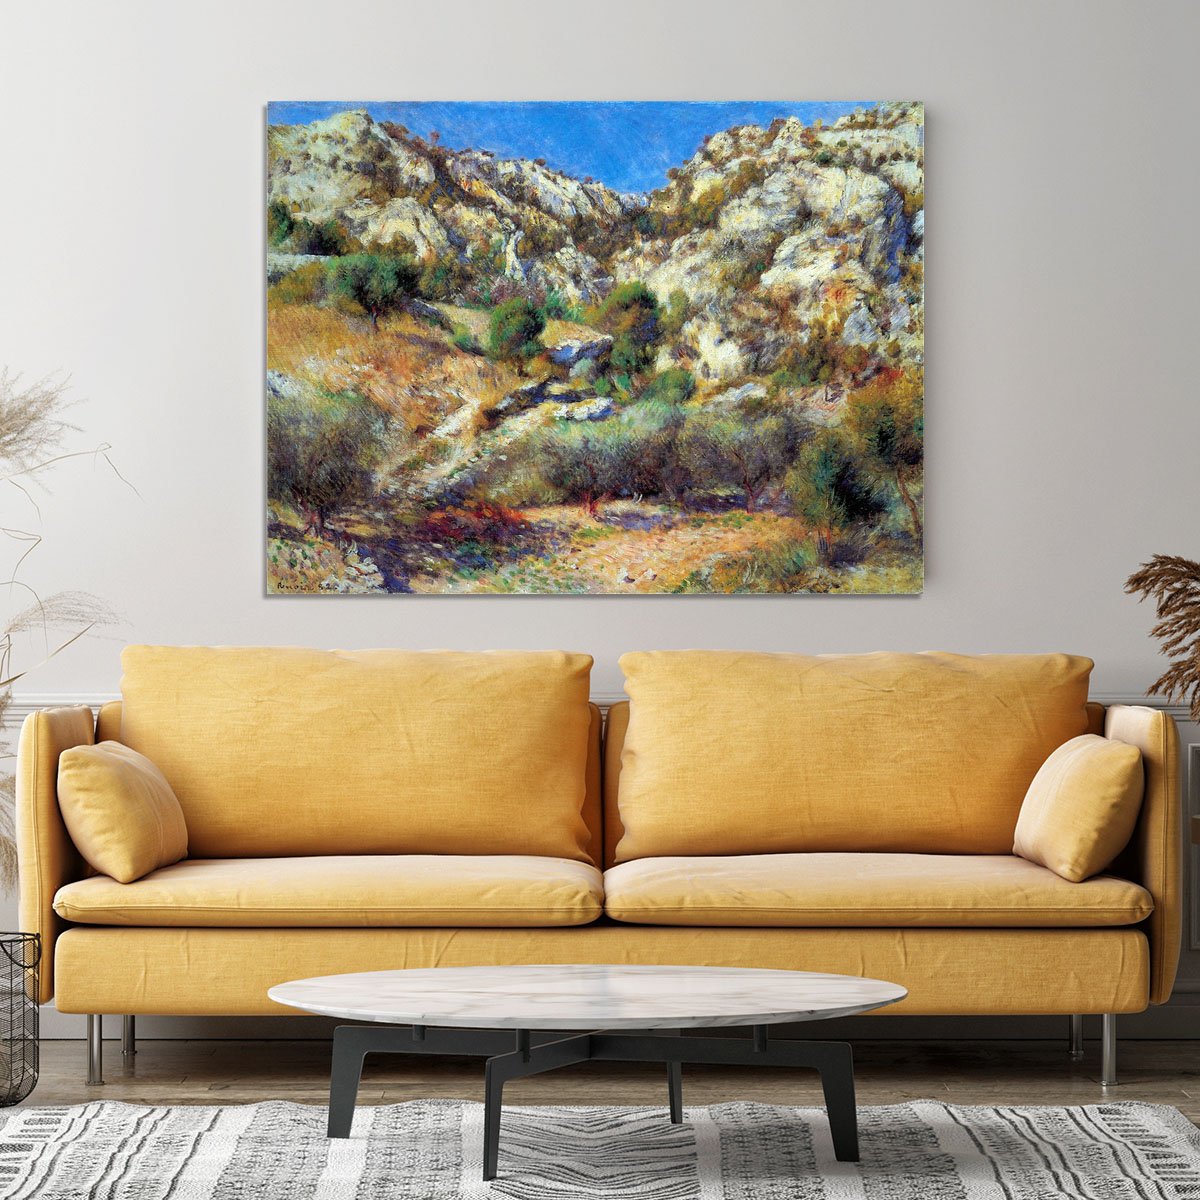 Rocks at LEstage by Renoir Canvas Print or Poster